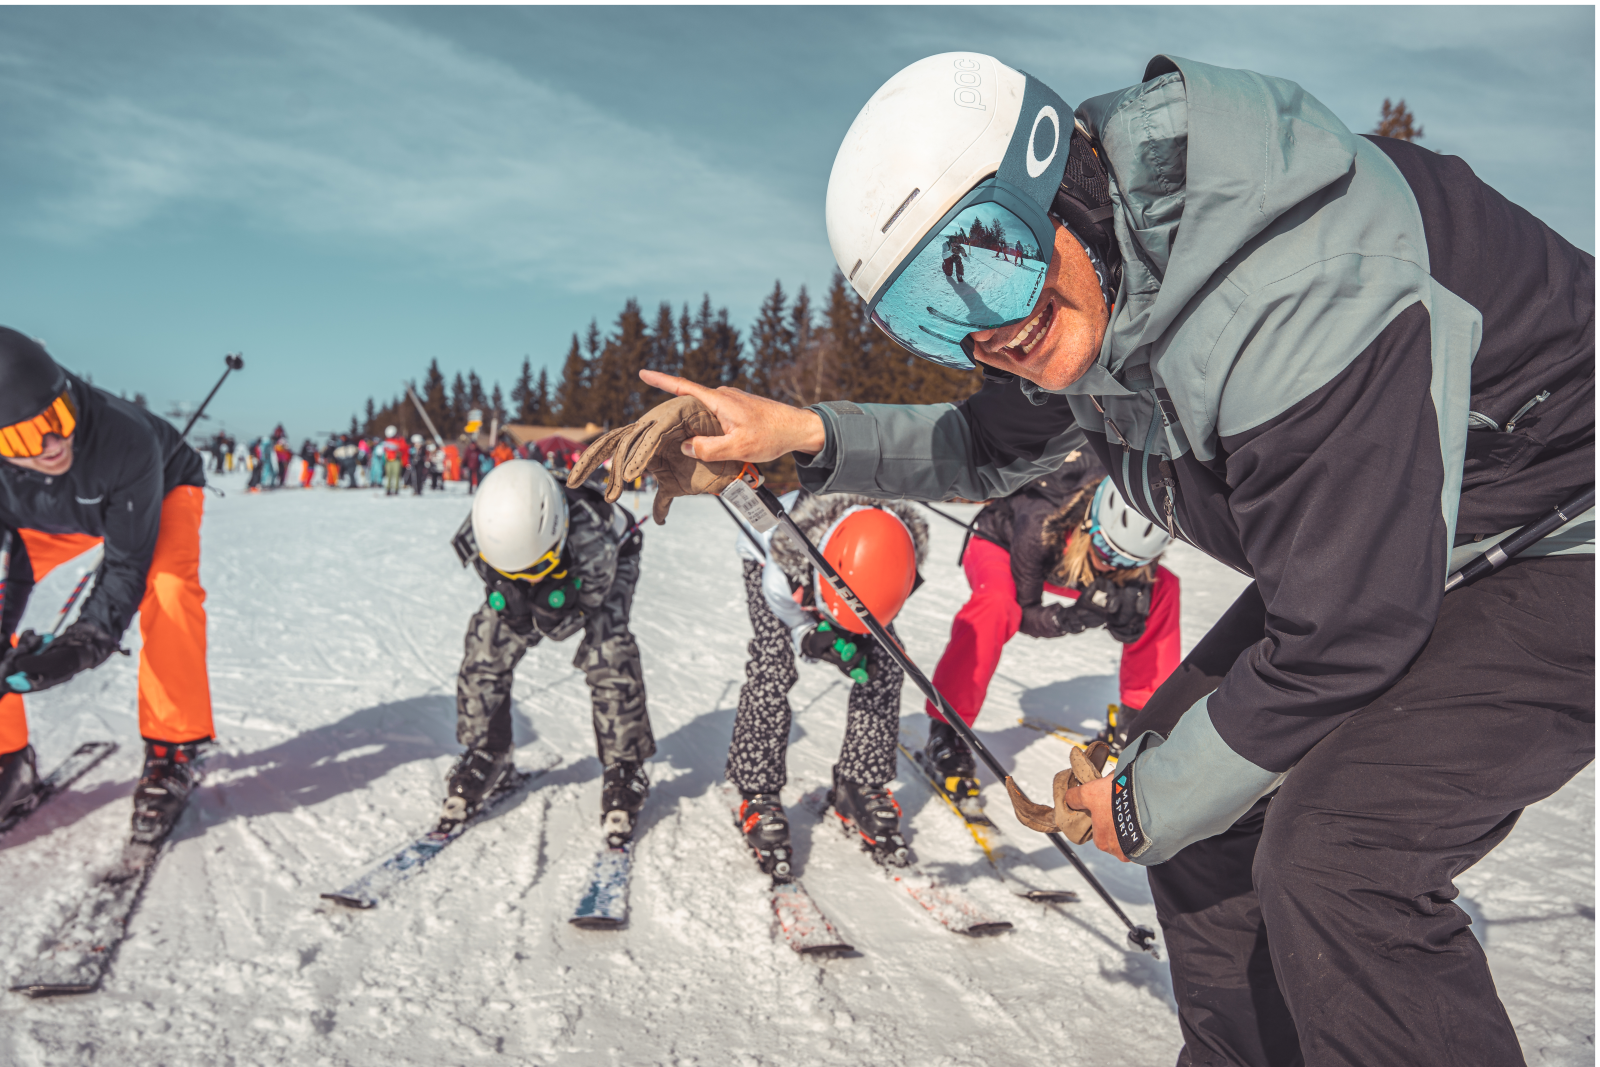 How to prepare for your first ski lesson: tips for beginner skiers